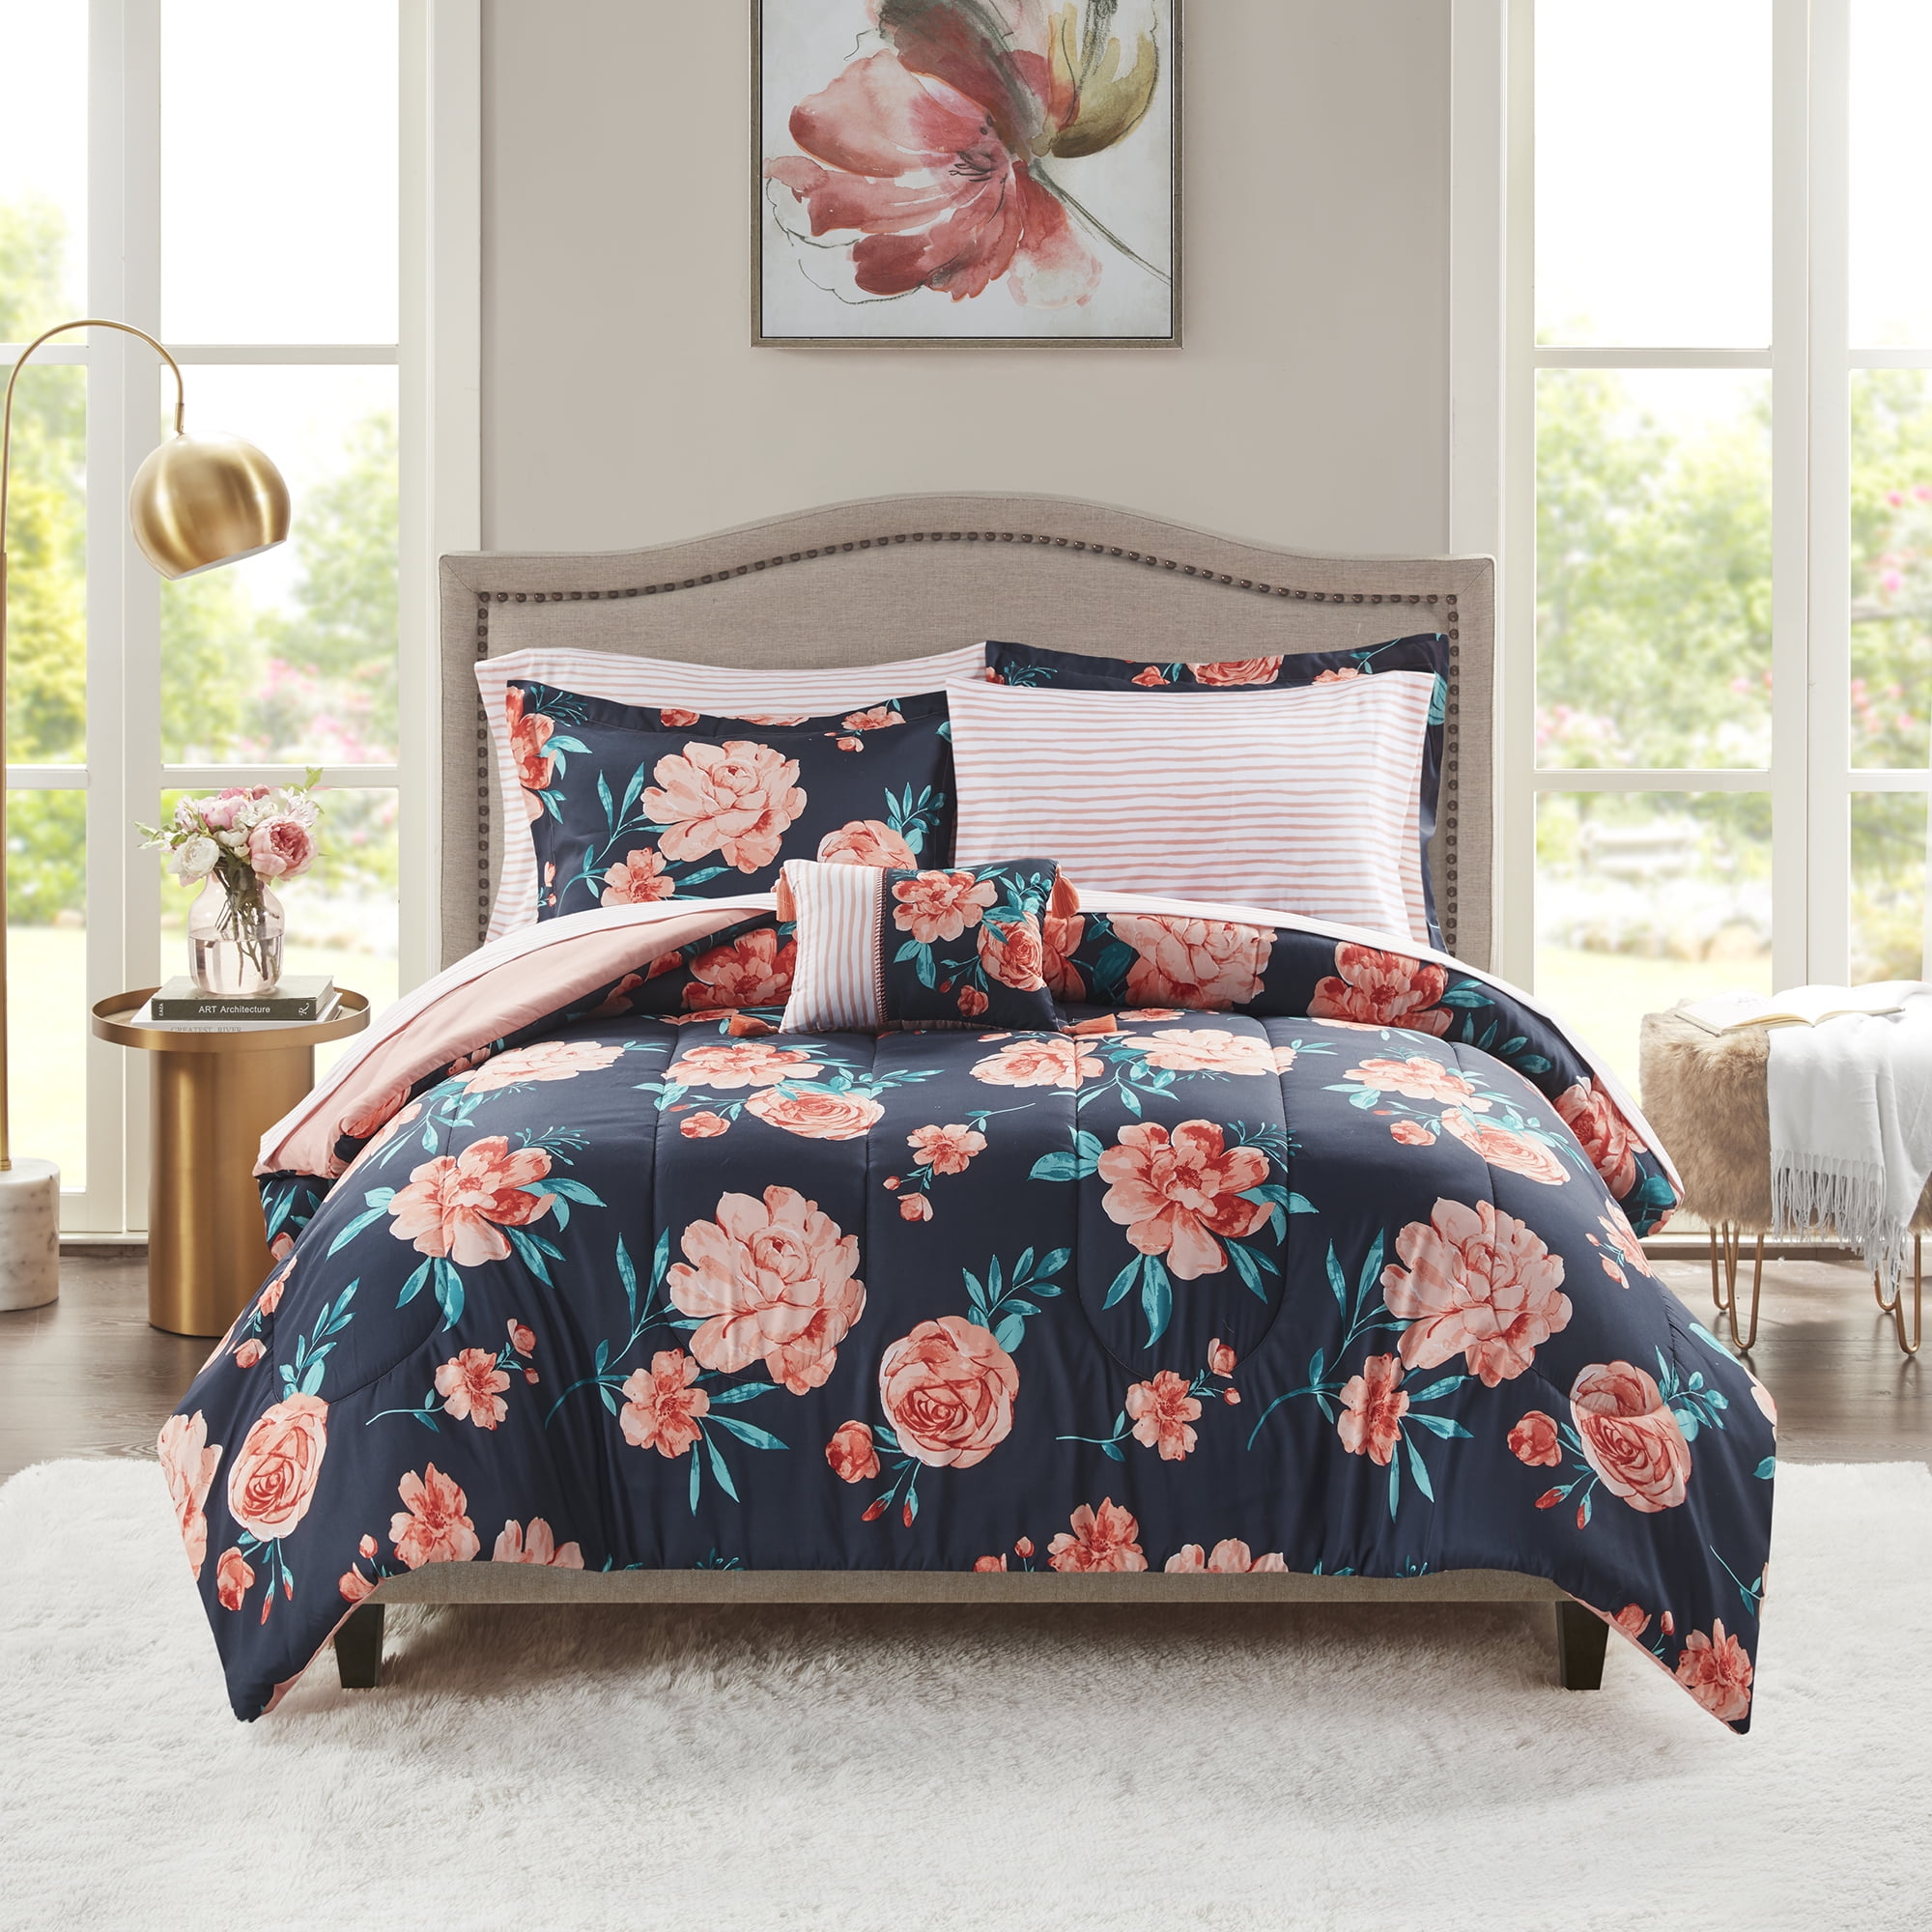 Mainstays Peach Floral 8 Piece Bed in a Bag Comforter Set with Sheets ...